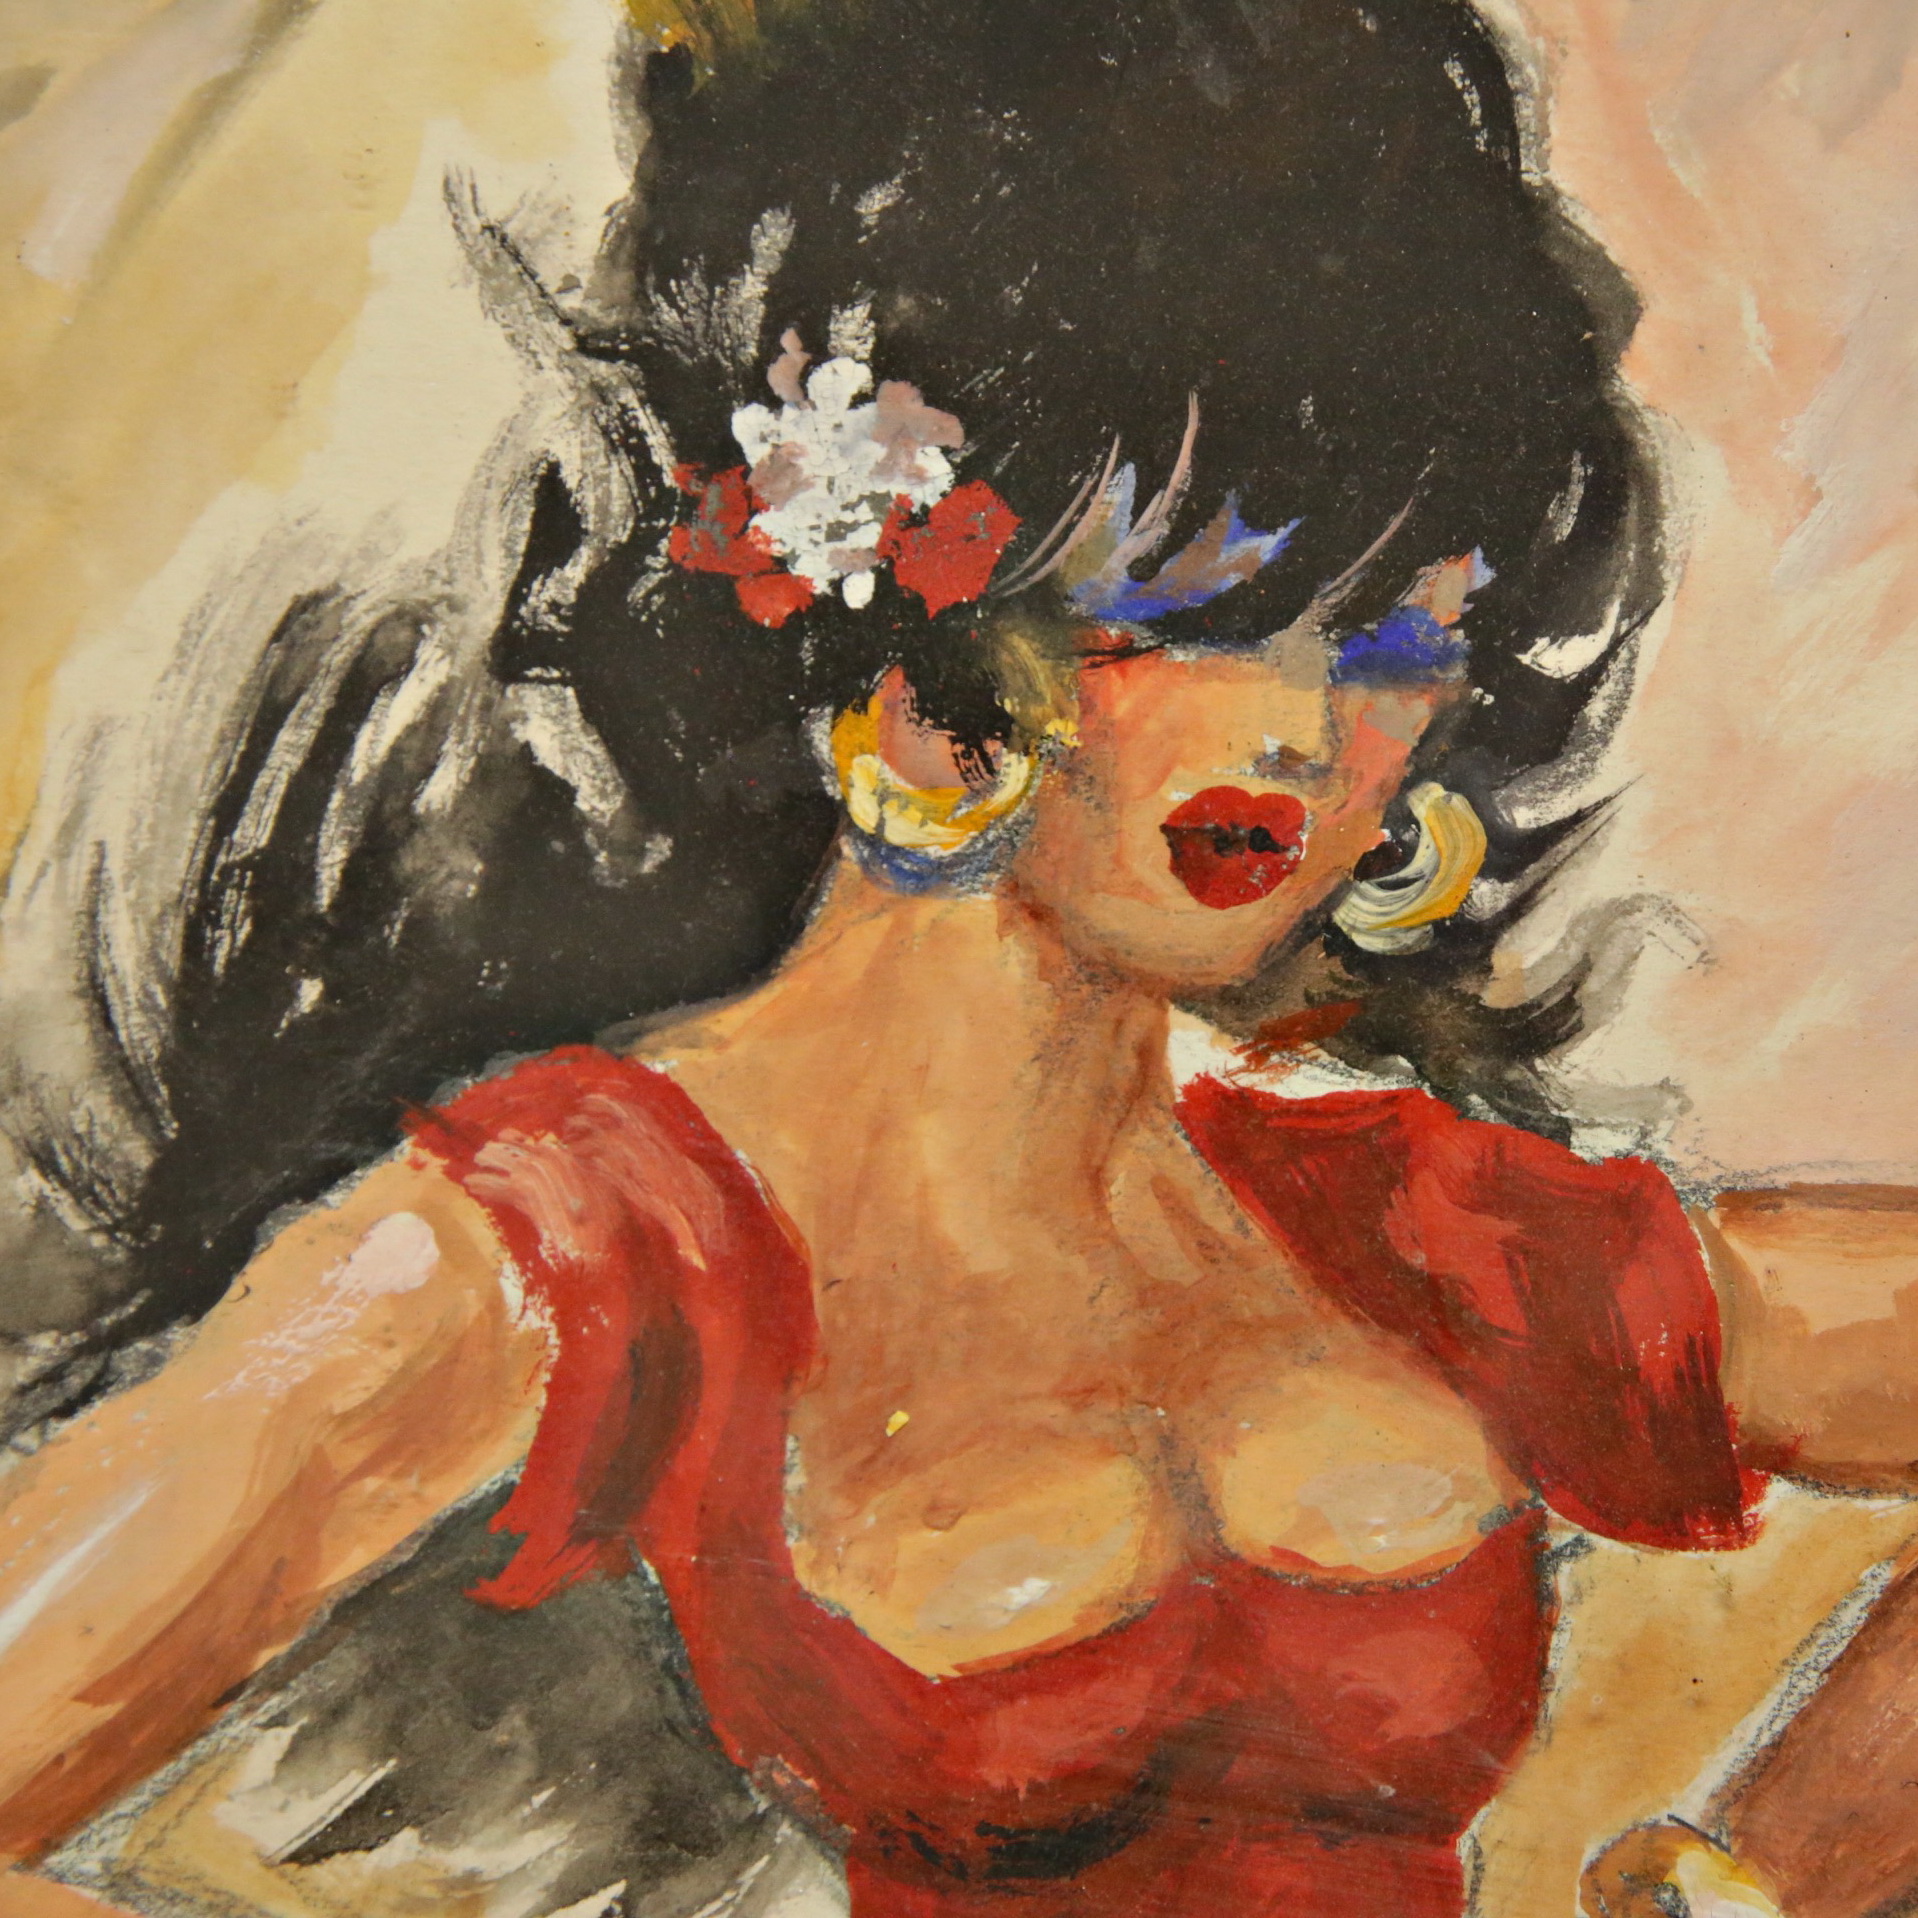 "Flamenco dancer", watercolor and gouache on paper, signed Taveau, Spanish painting of the 20th C. - Image 3 of 4